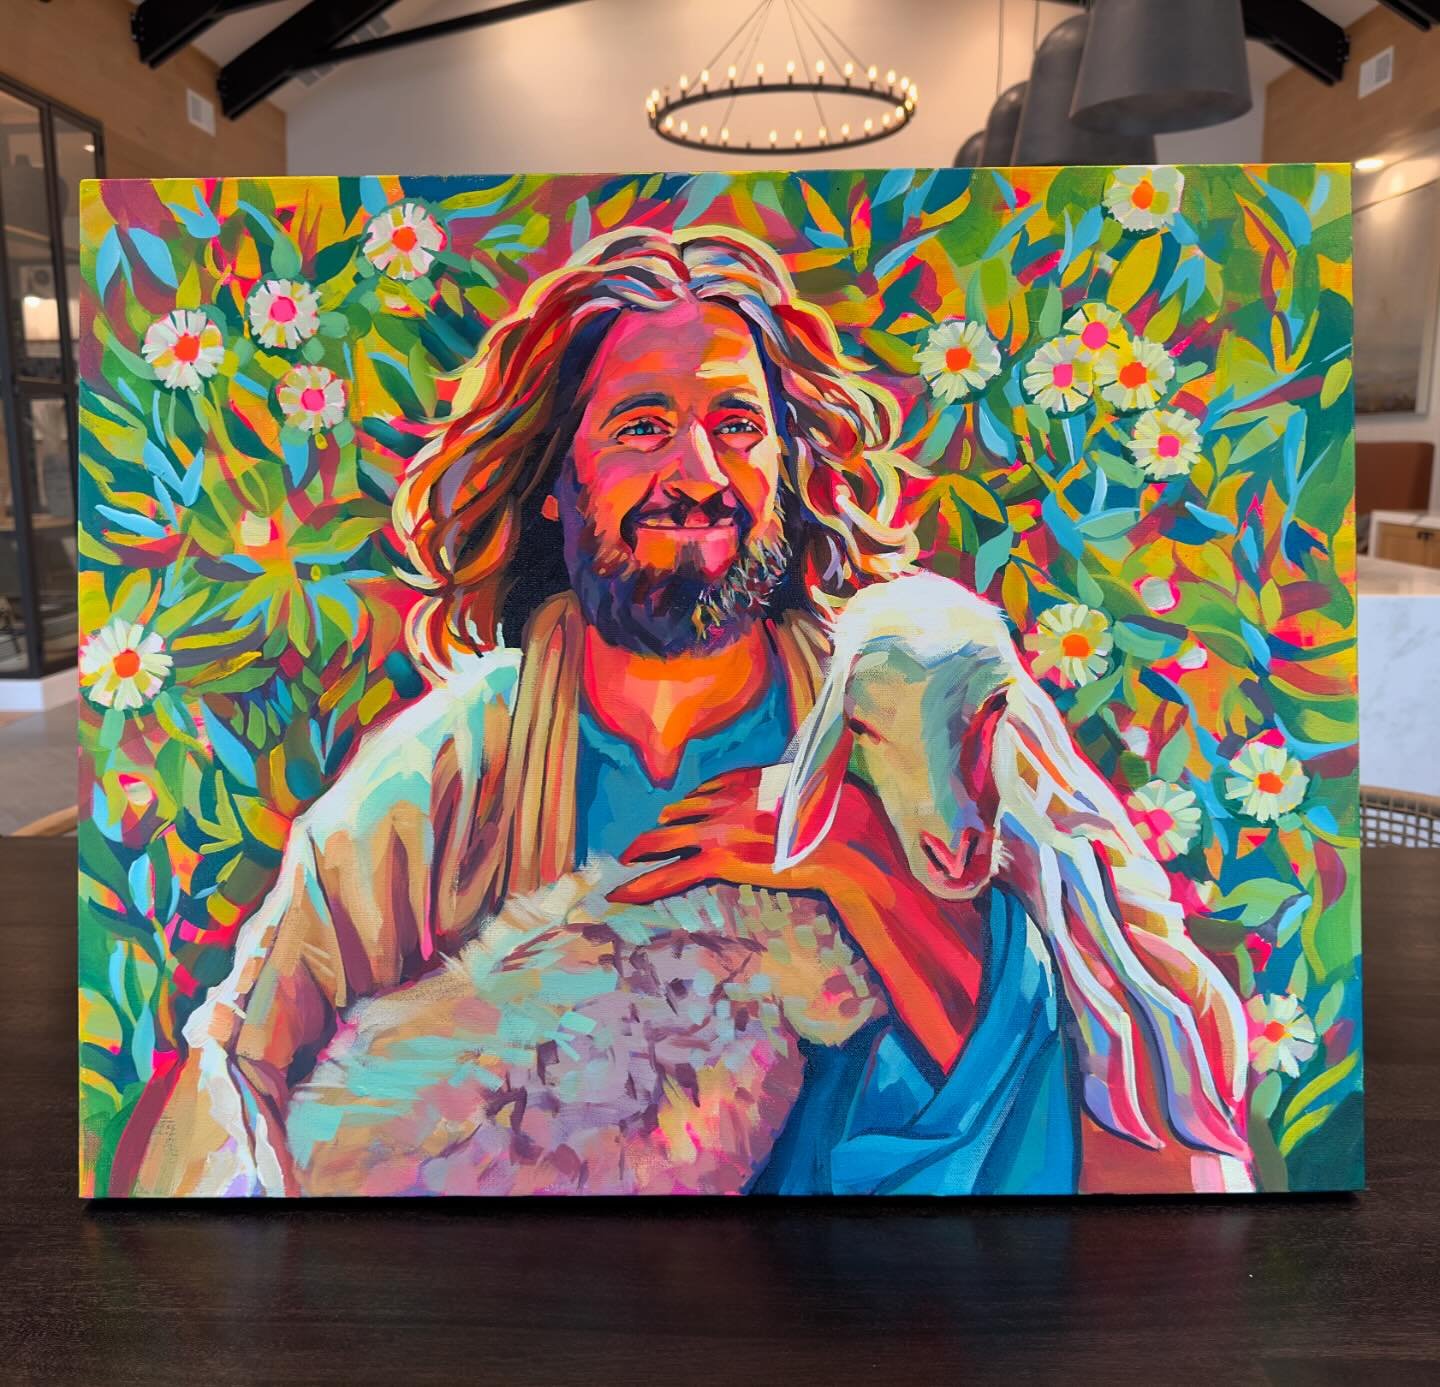 &ldquo;The Lord is my shepherd; I shall not want. He makes me lie down in green pastures. He leads me beside still waters.&rdquo;
‭30x24&quot; acrylic on canvas &quot;The Good Shepherd&quot;  #psalm23